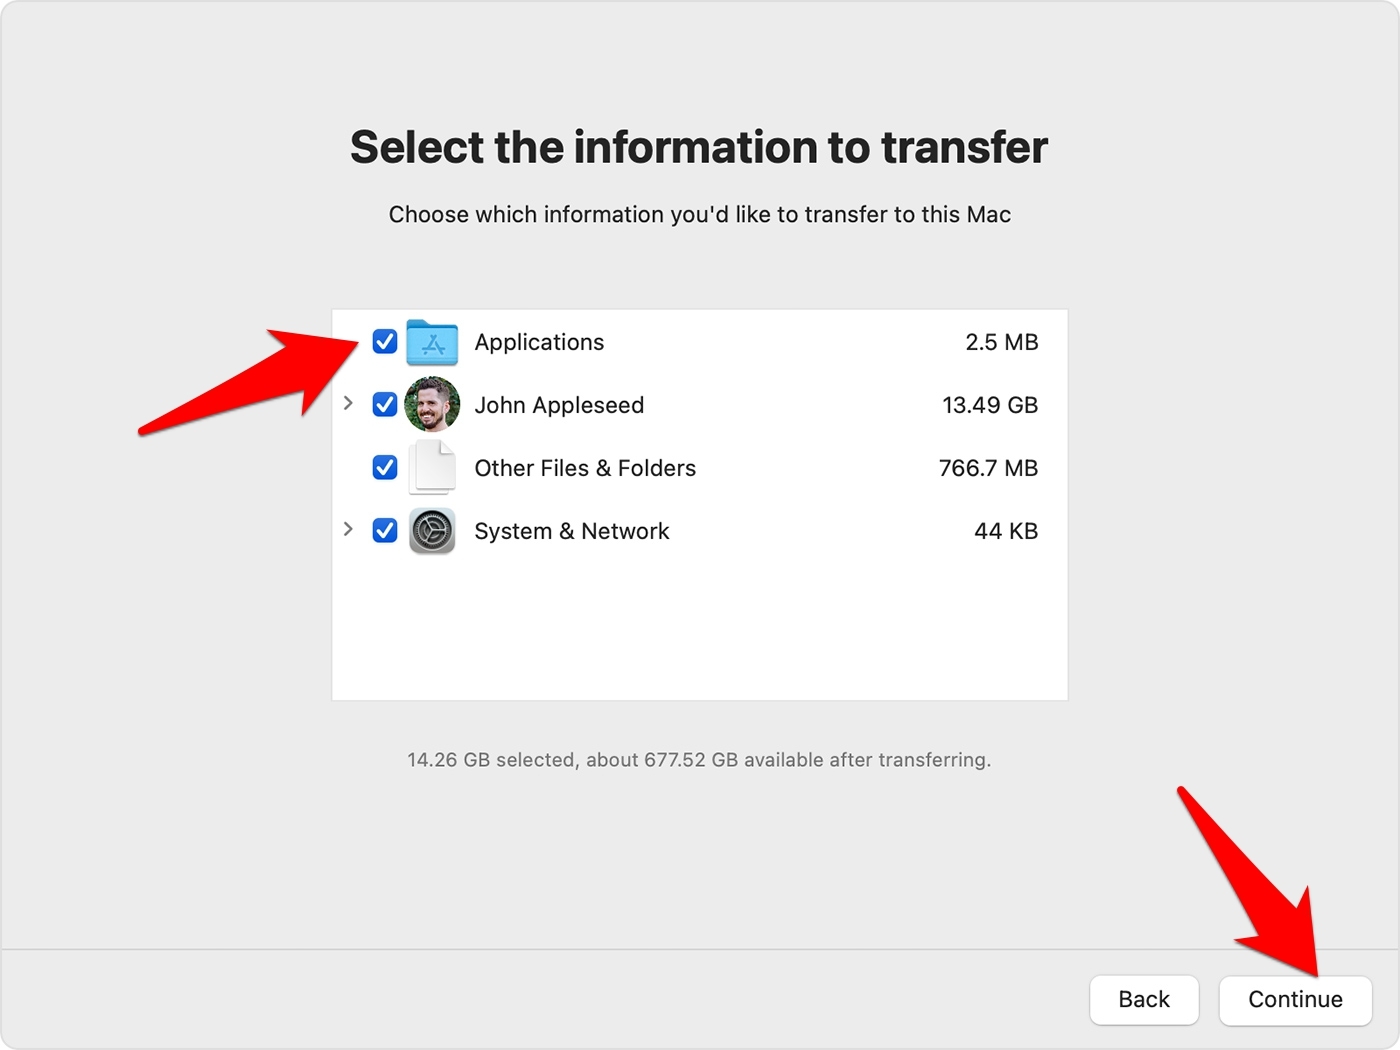 Select the information to transfer using Migration Assistant